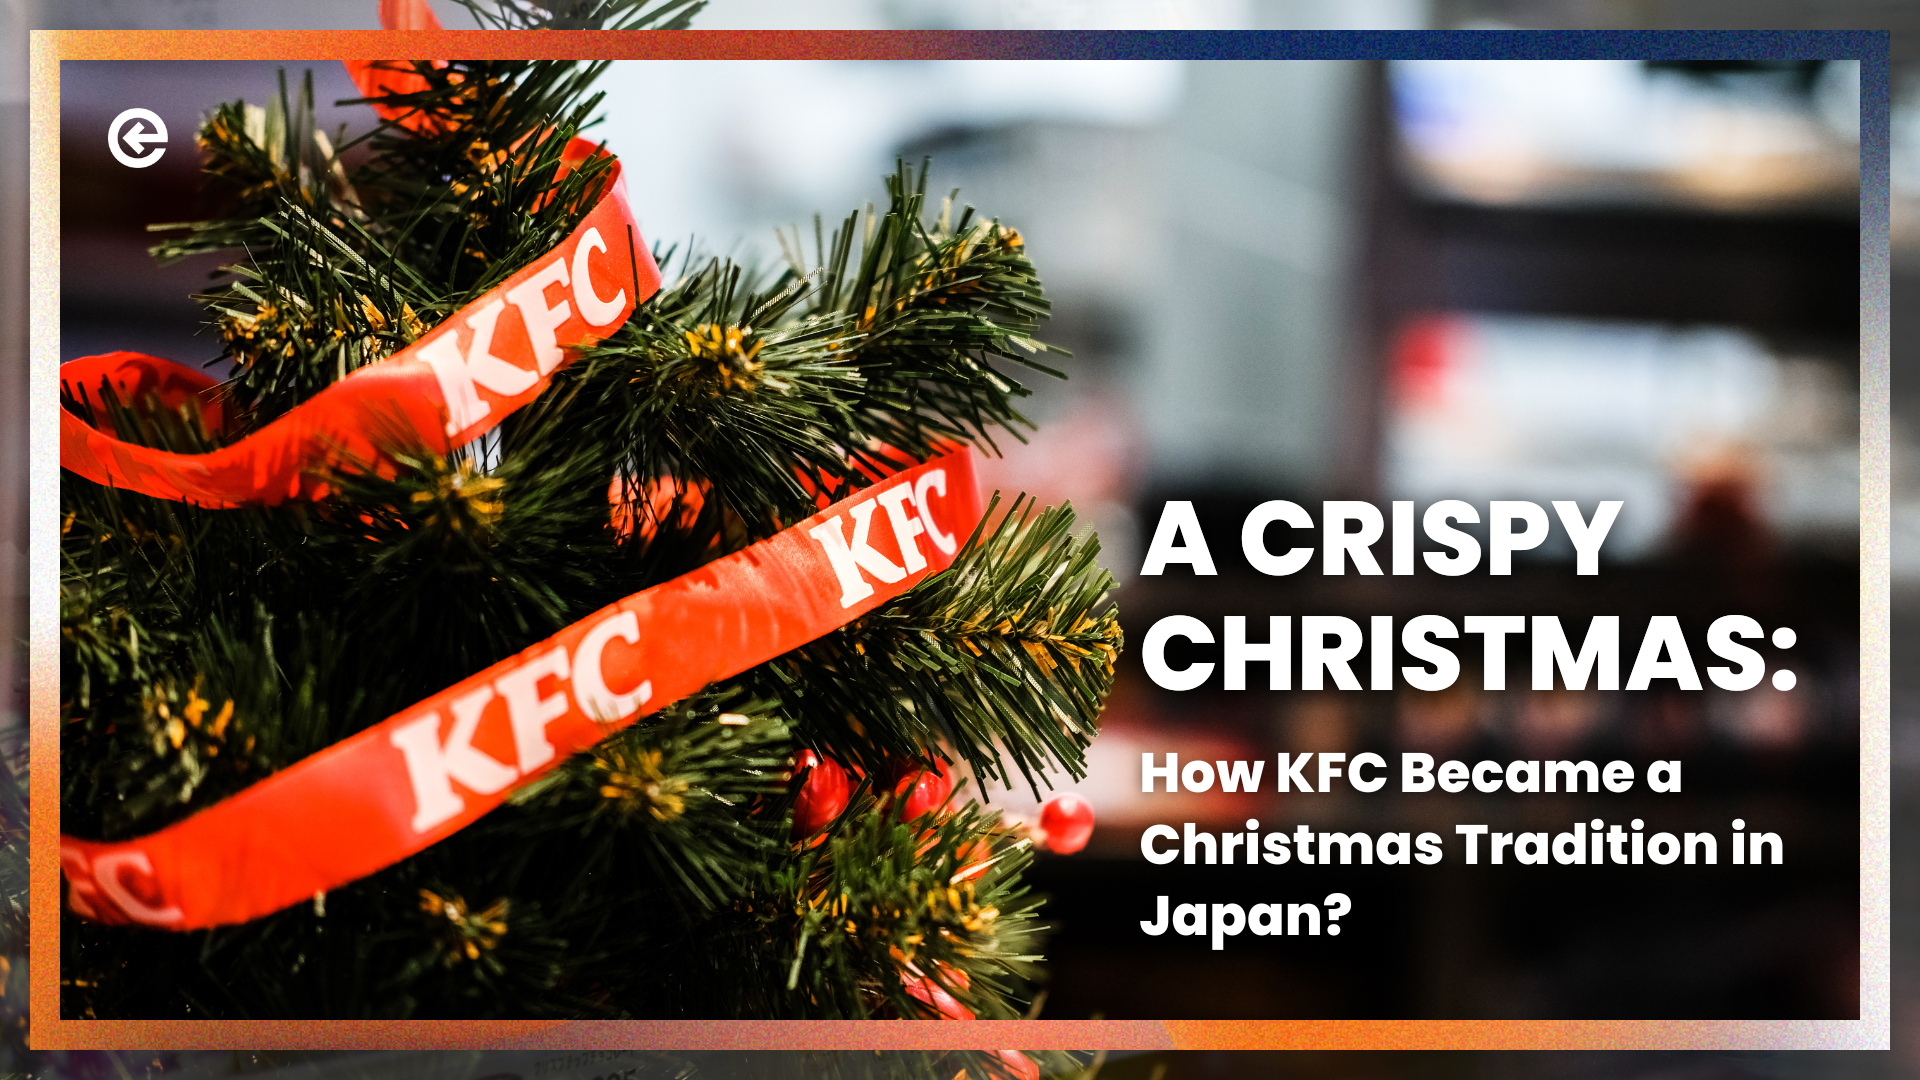 How KFC Became A Christmas Tradition in Japan?